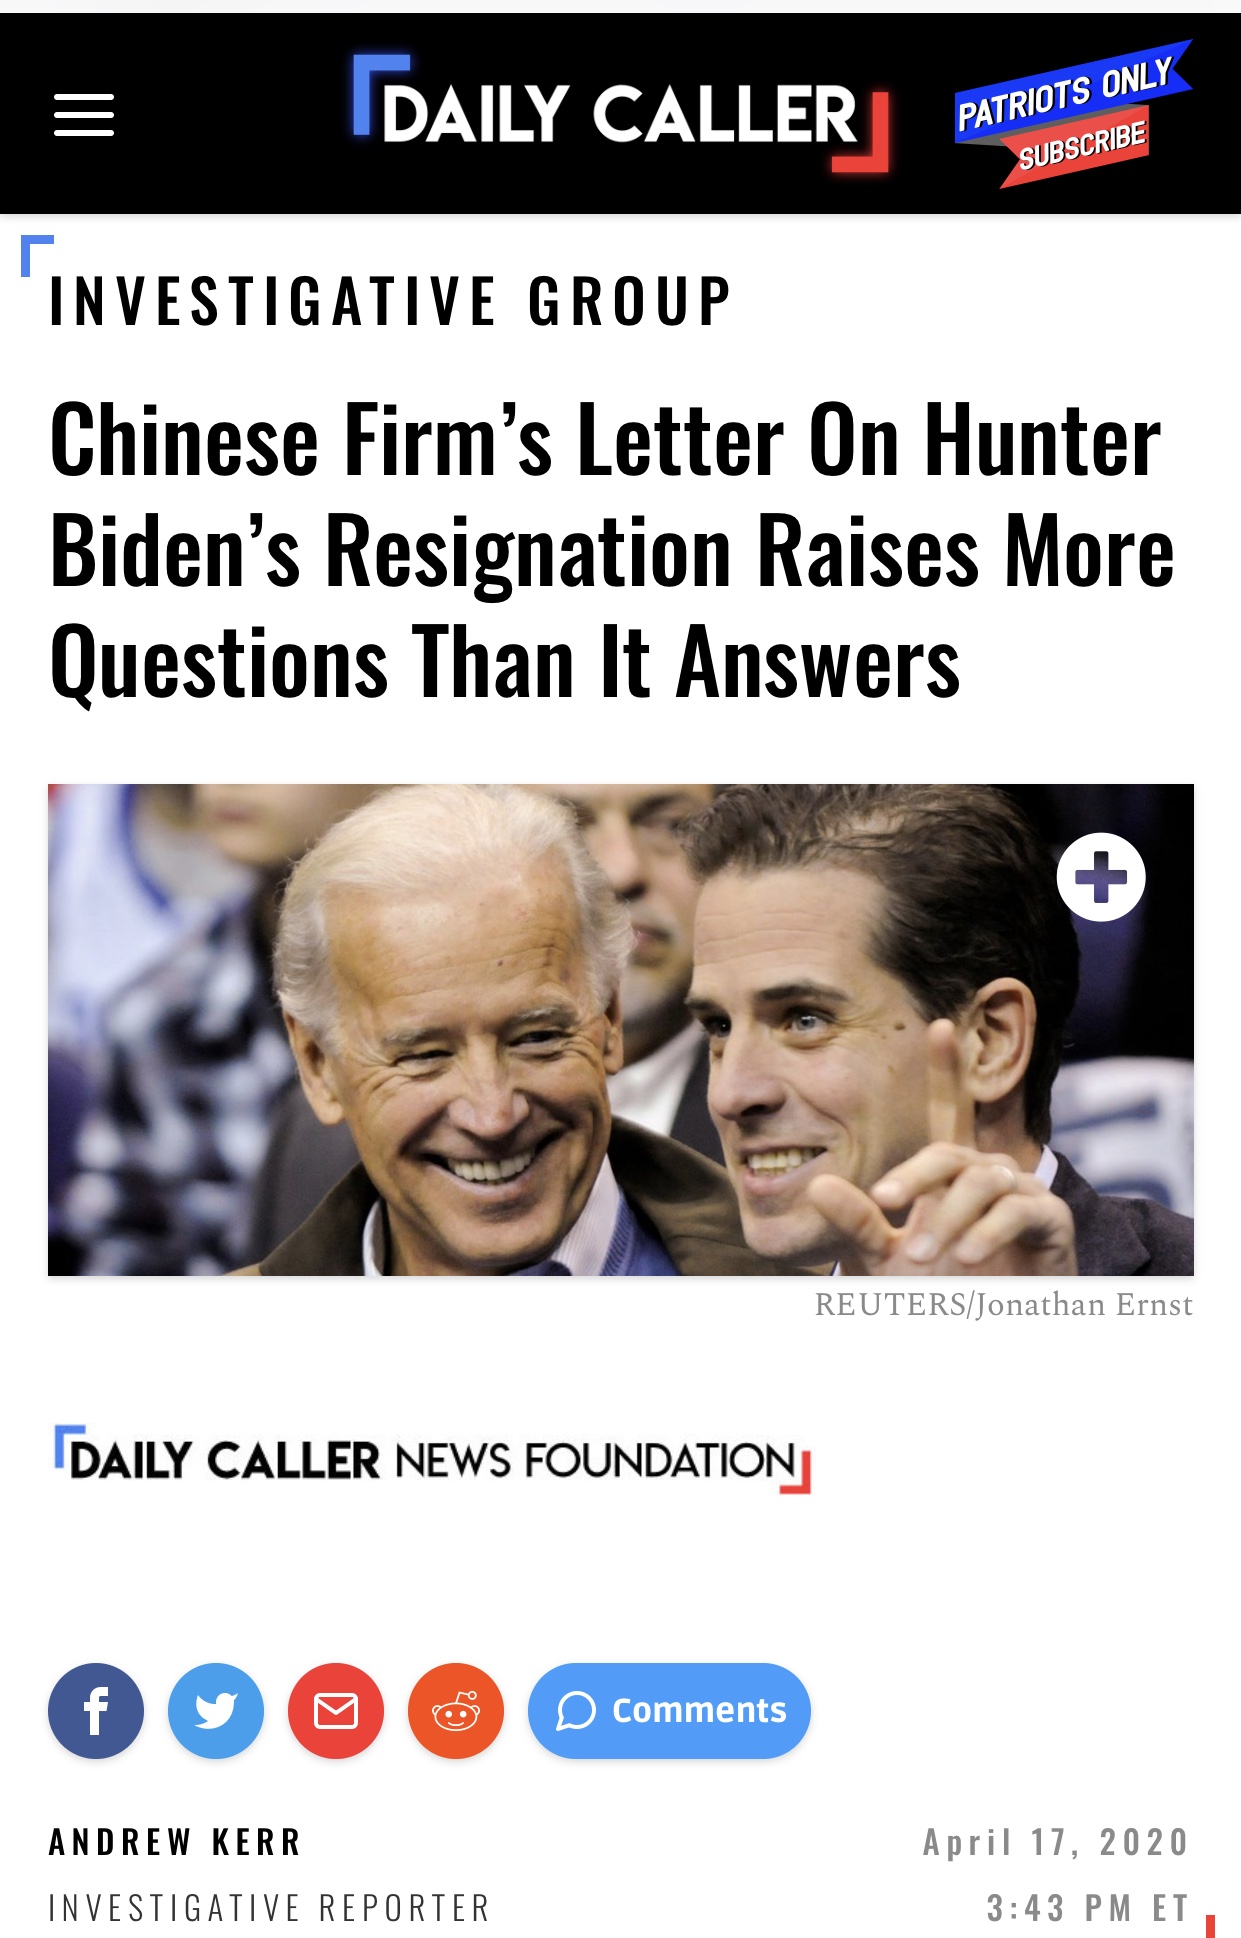 Chinese Firm’s Letter On Hunter Biden’s Resignation Raises More Questions Than It Answers | The Daily Caller